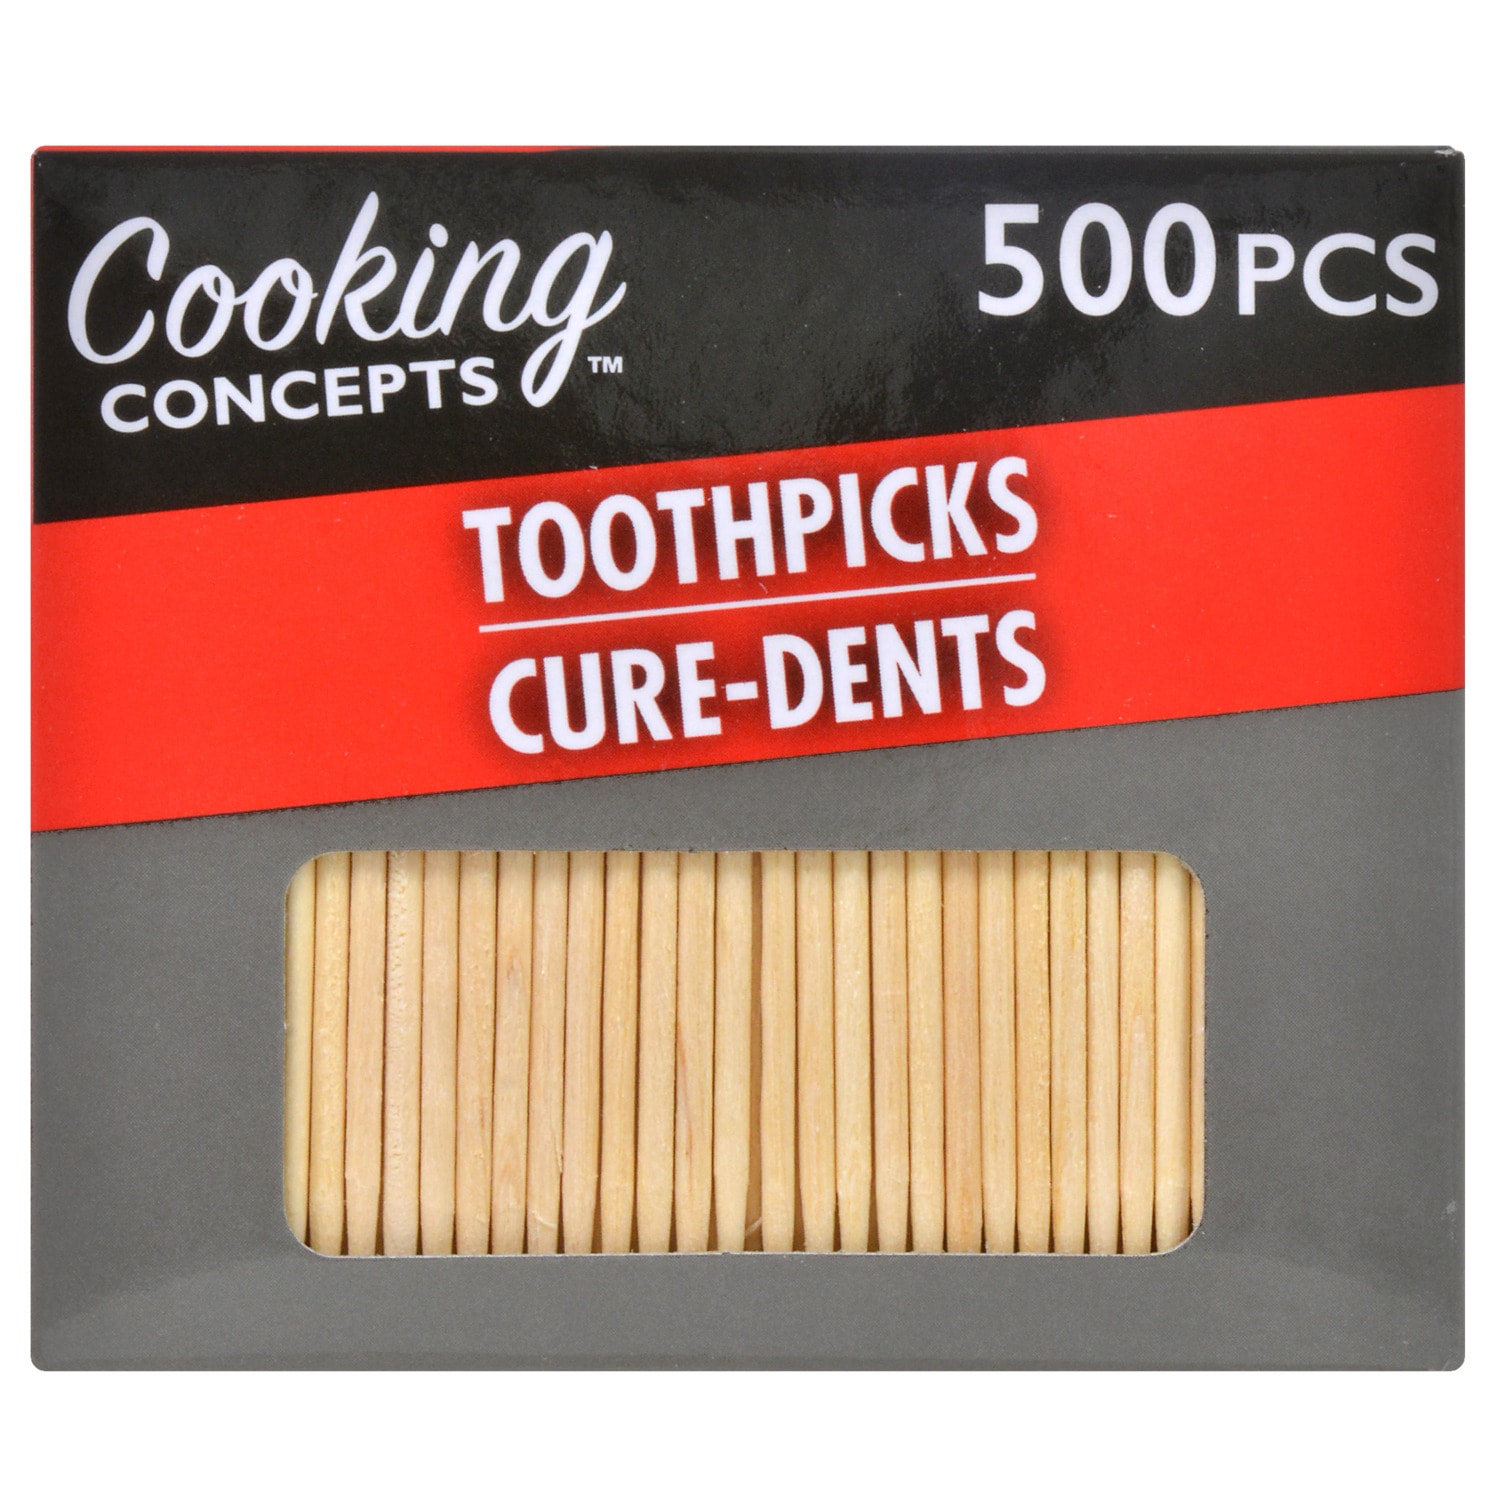 Cooking Concepts 500 Wooden Toothpicks Round party appetizer ~ Qty 1 